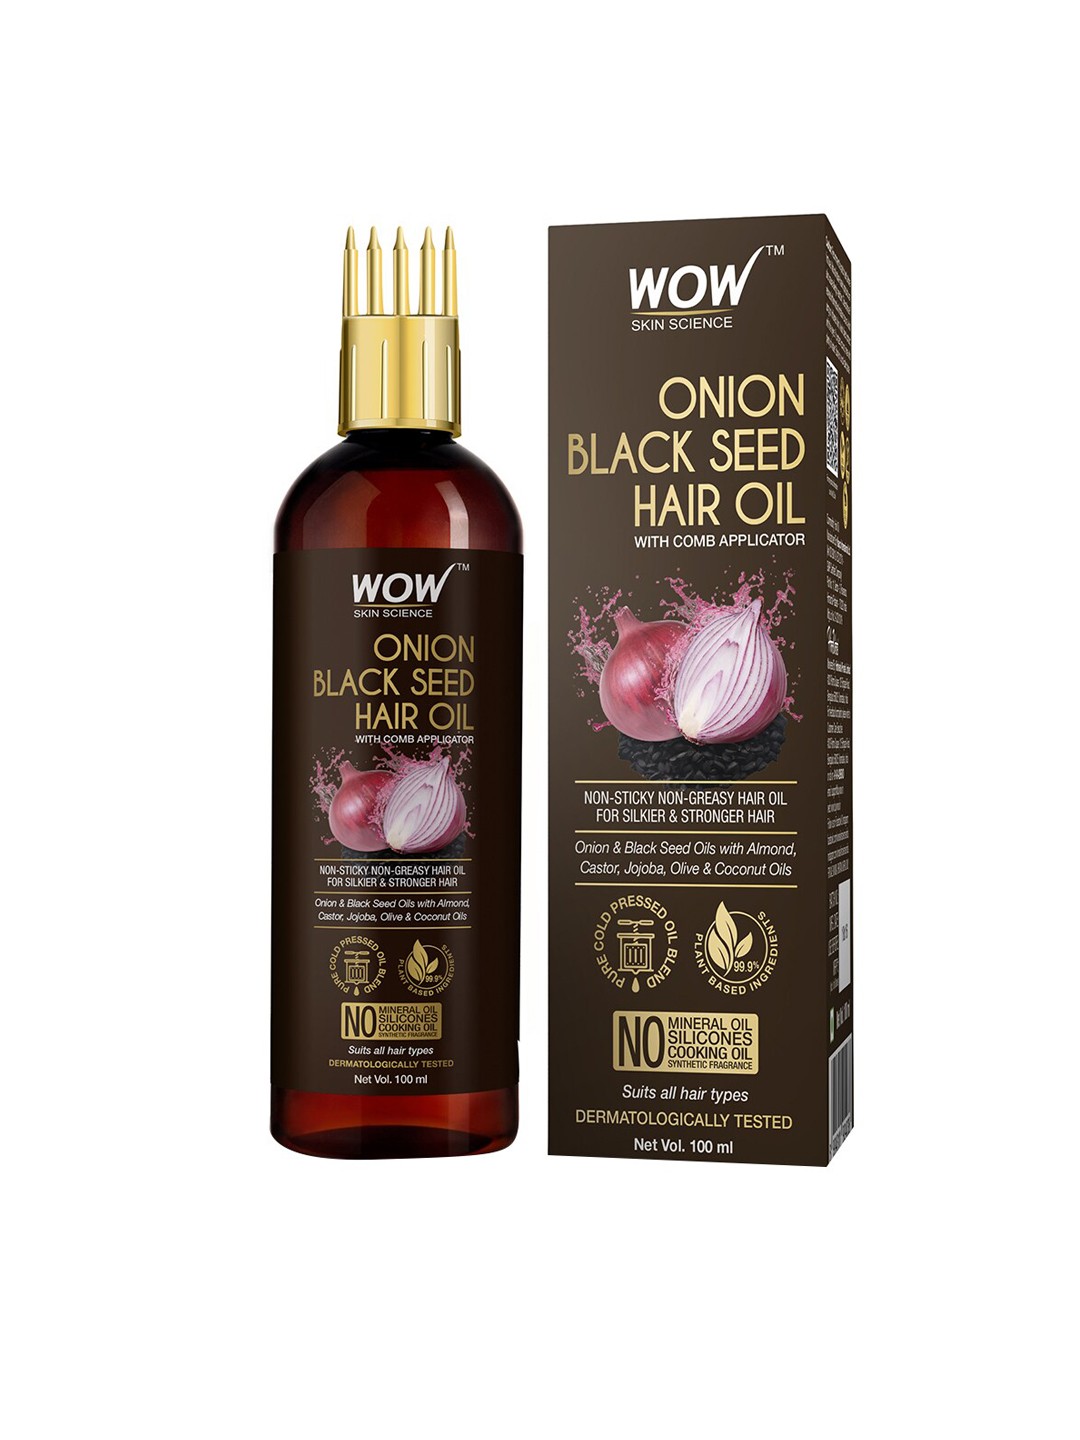 WOW Hair Oil Full Review With 20% Coupon Code 2021